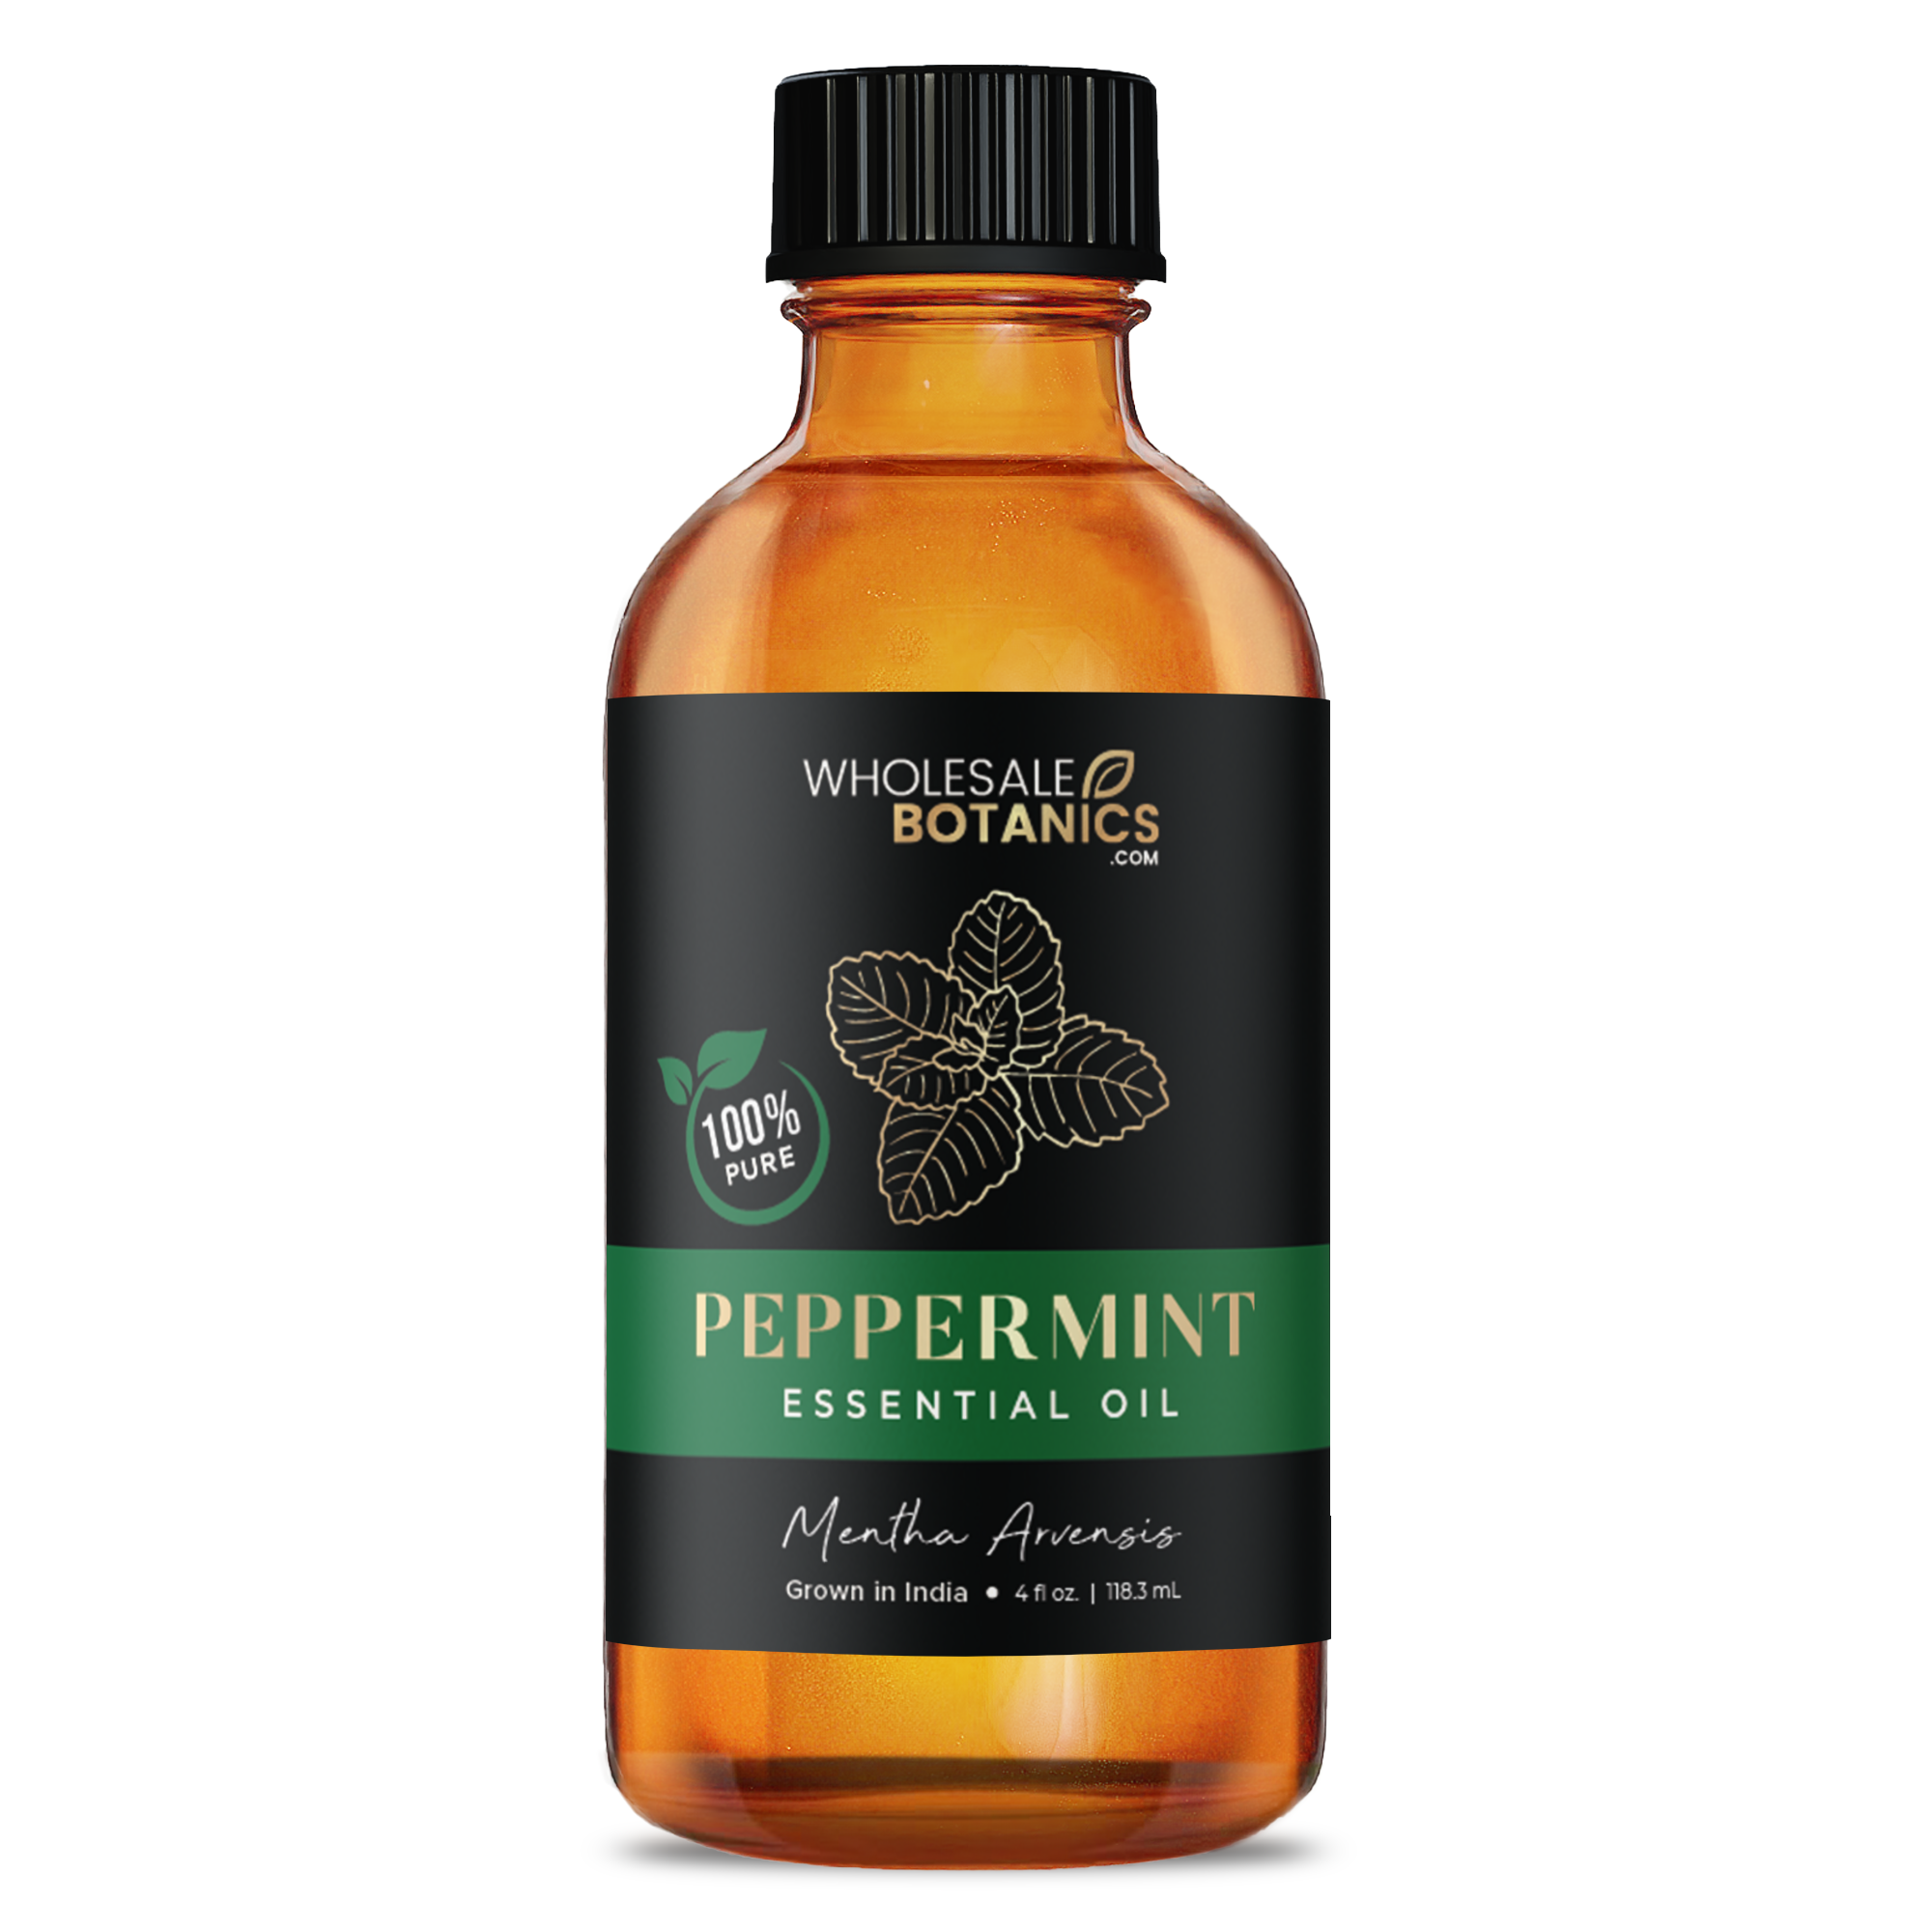 Purity Peppermint Essential Oil - Pure Mentha Arvensis - 4 oz